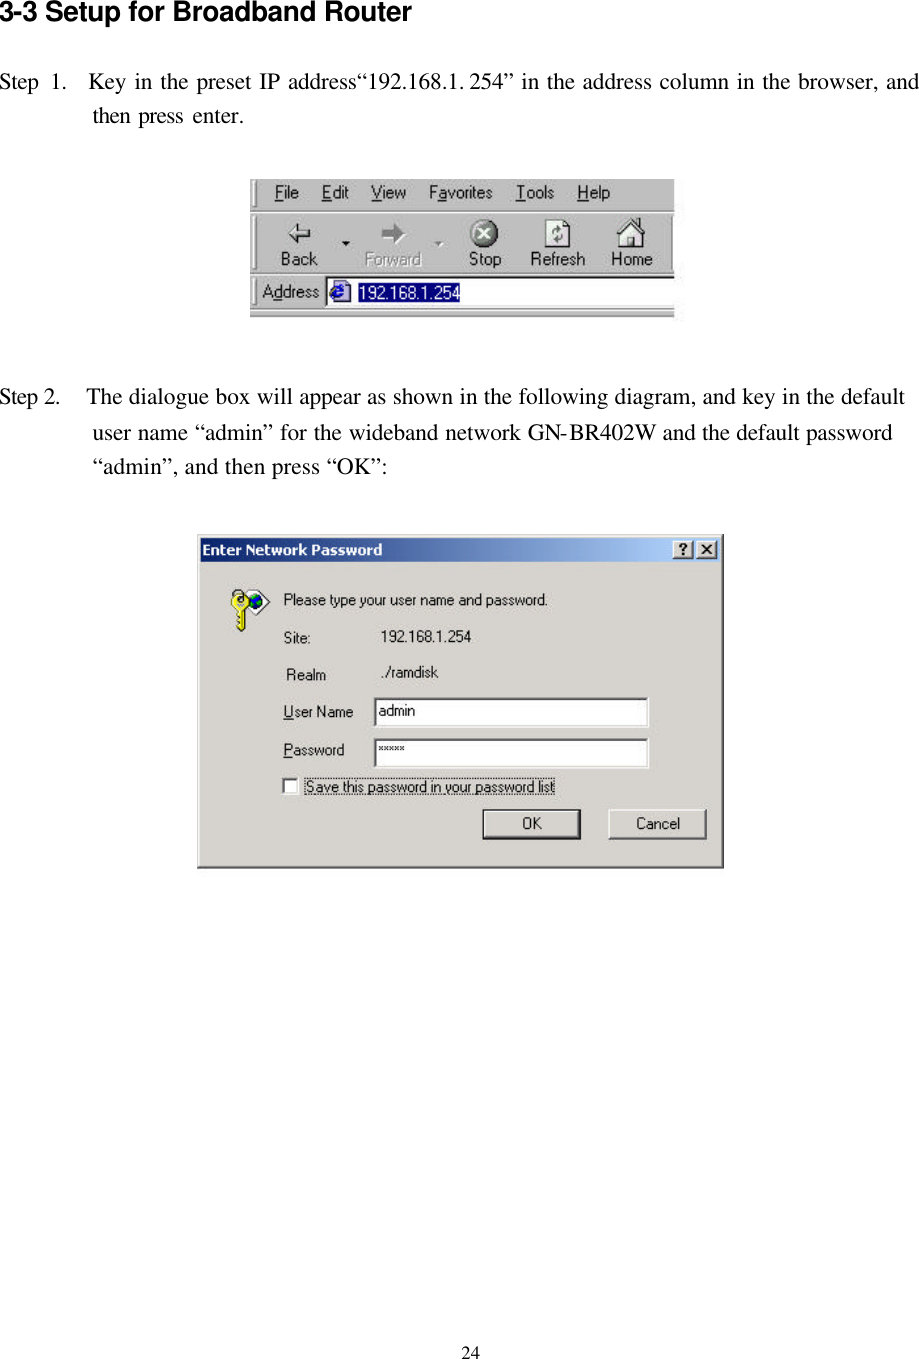   24  3-3 Setup for Broadband Router    Step 1.  Key in the preset IP address“192.168.1. 254” in the address column in the browser, and then press enter.       Step 2.   The dialogue box will appear as shown in the following diagram, and key in the default user name “admin” for the wideband network GN-BR402W and the default password “admin”, and then press “OK”:              